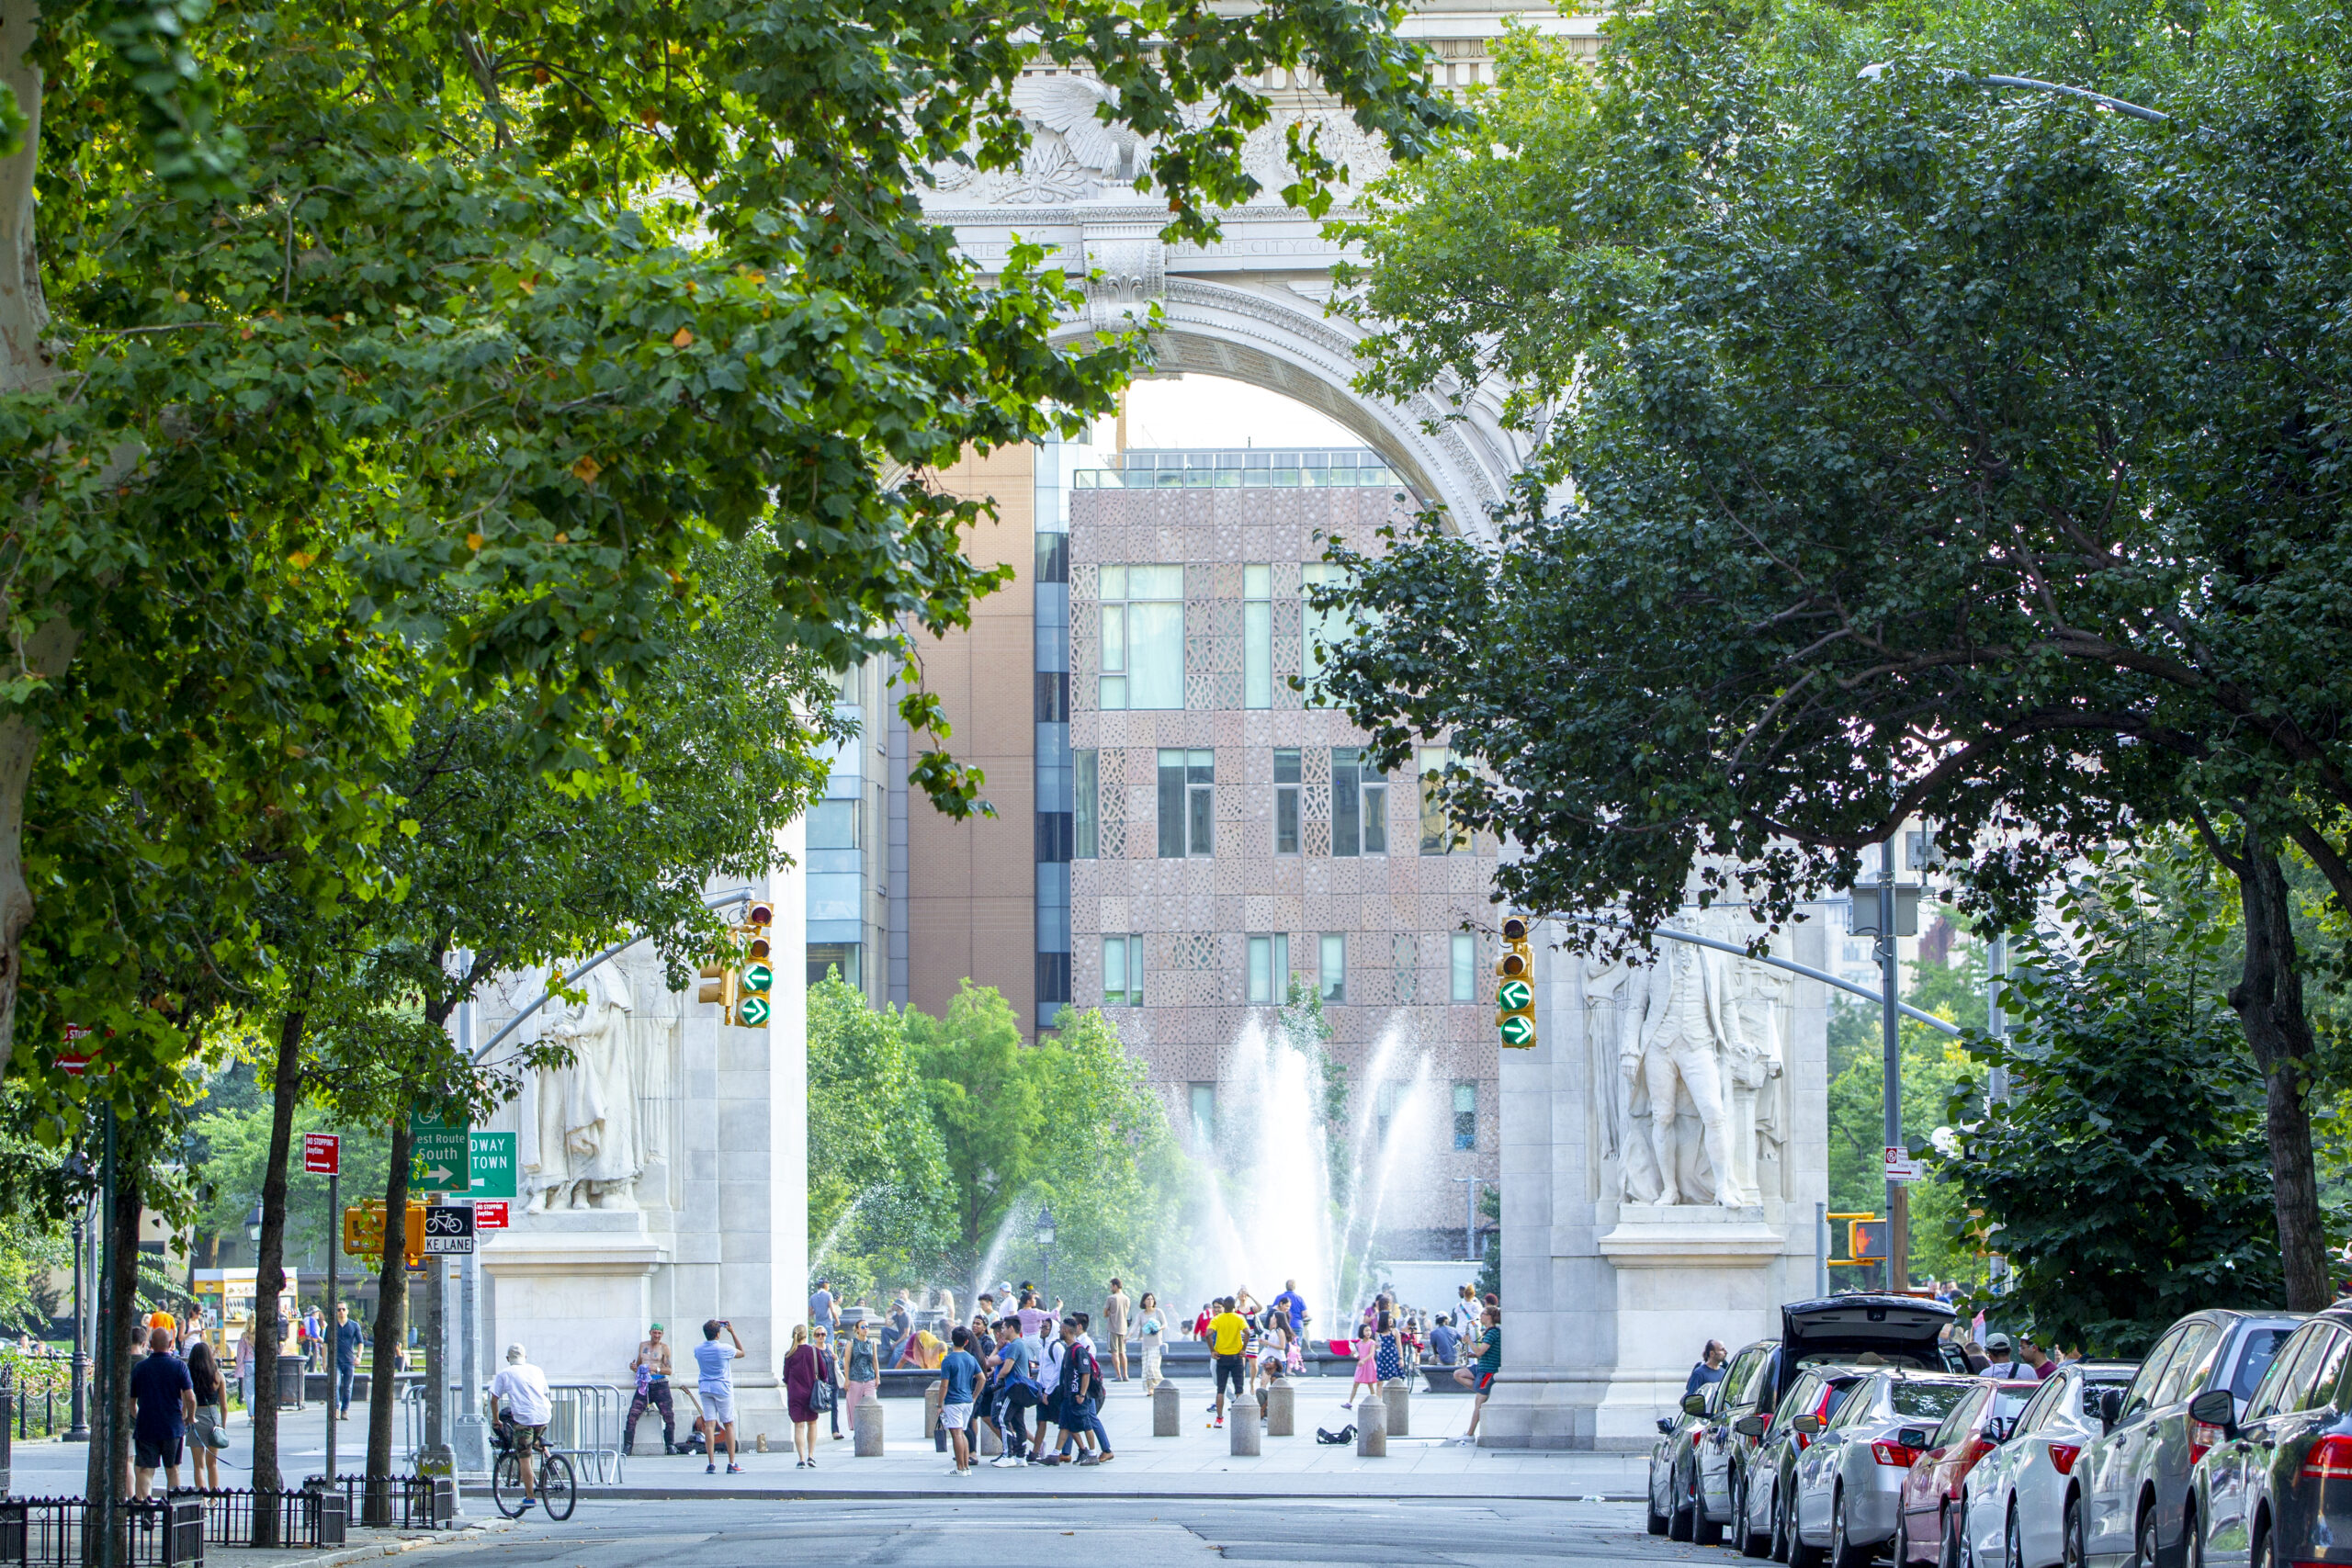 The view of the Washington Square Park Arch from Fifth Avenue.